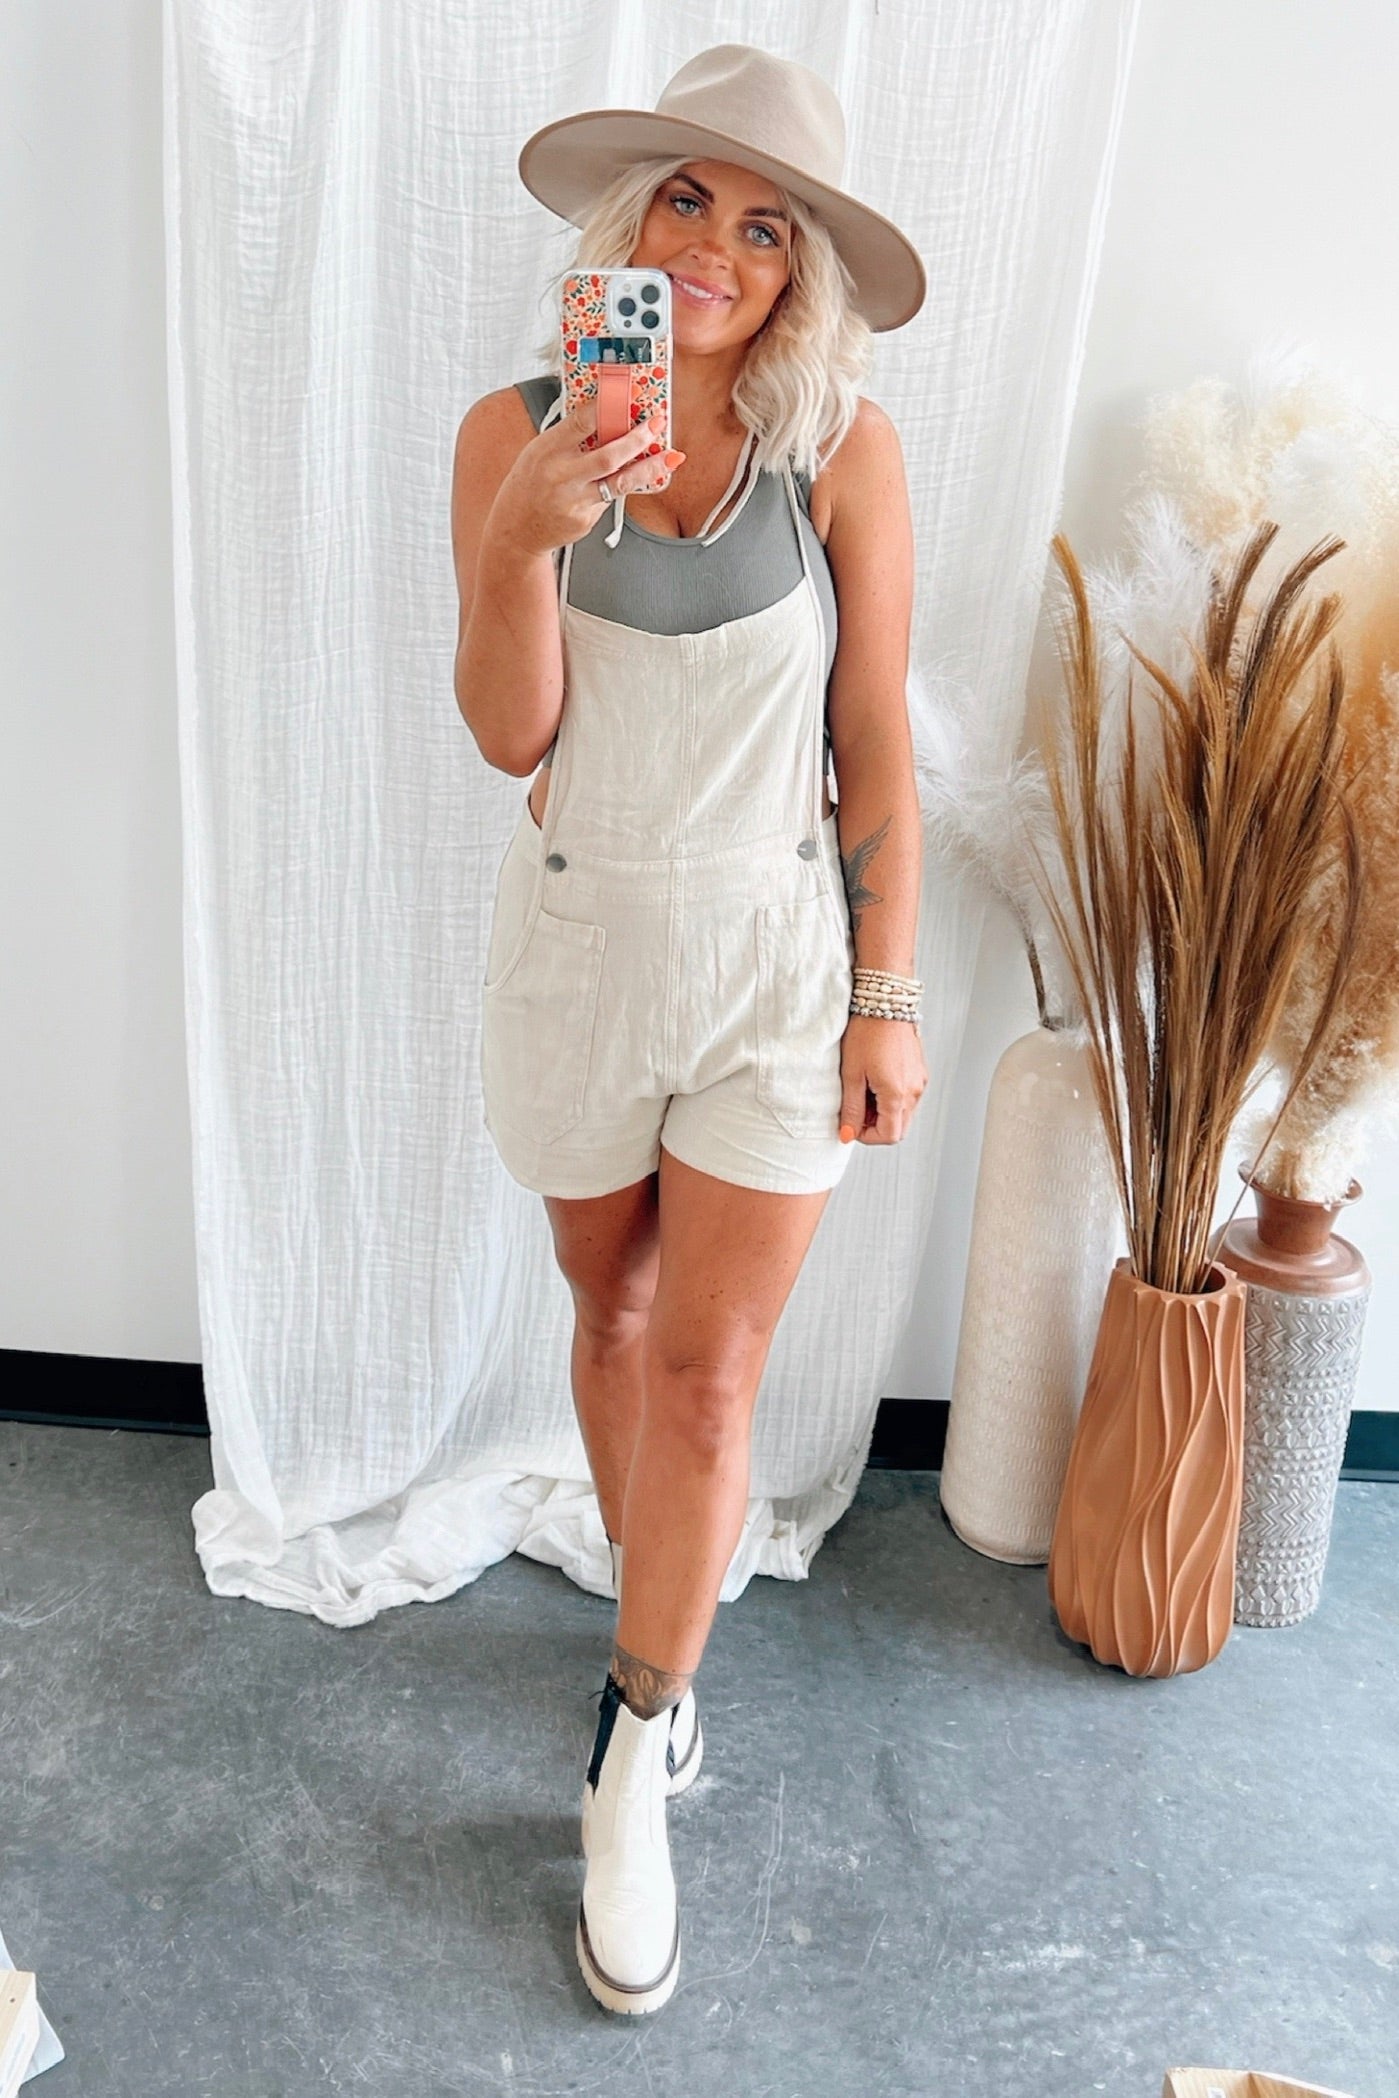 Call It Love Pocket Overalls - FINAL SALE